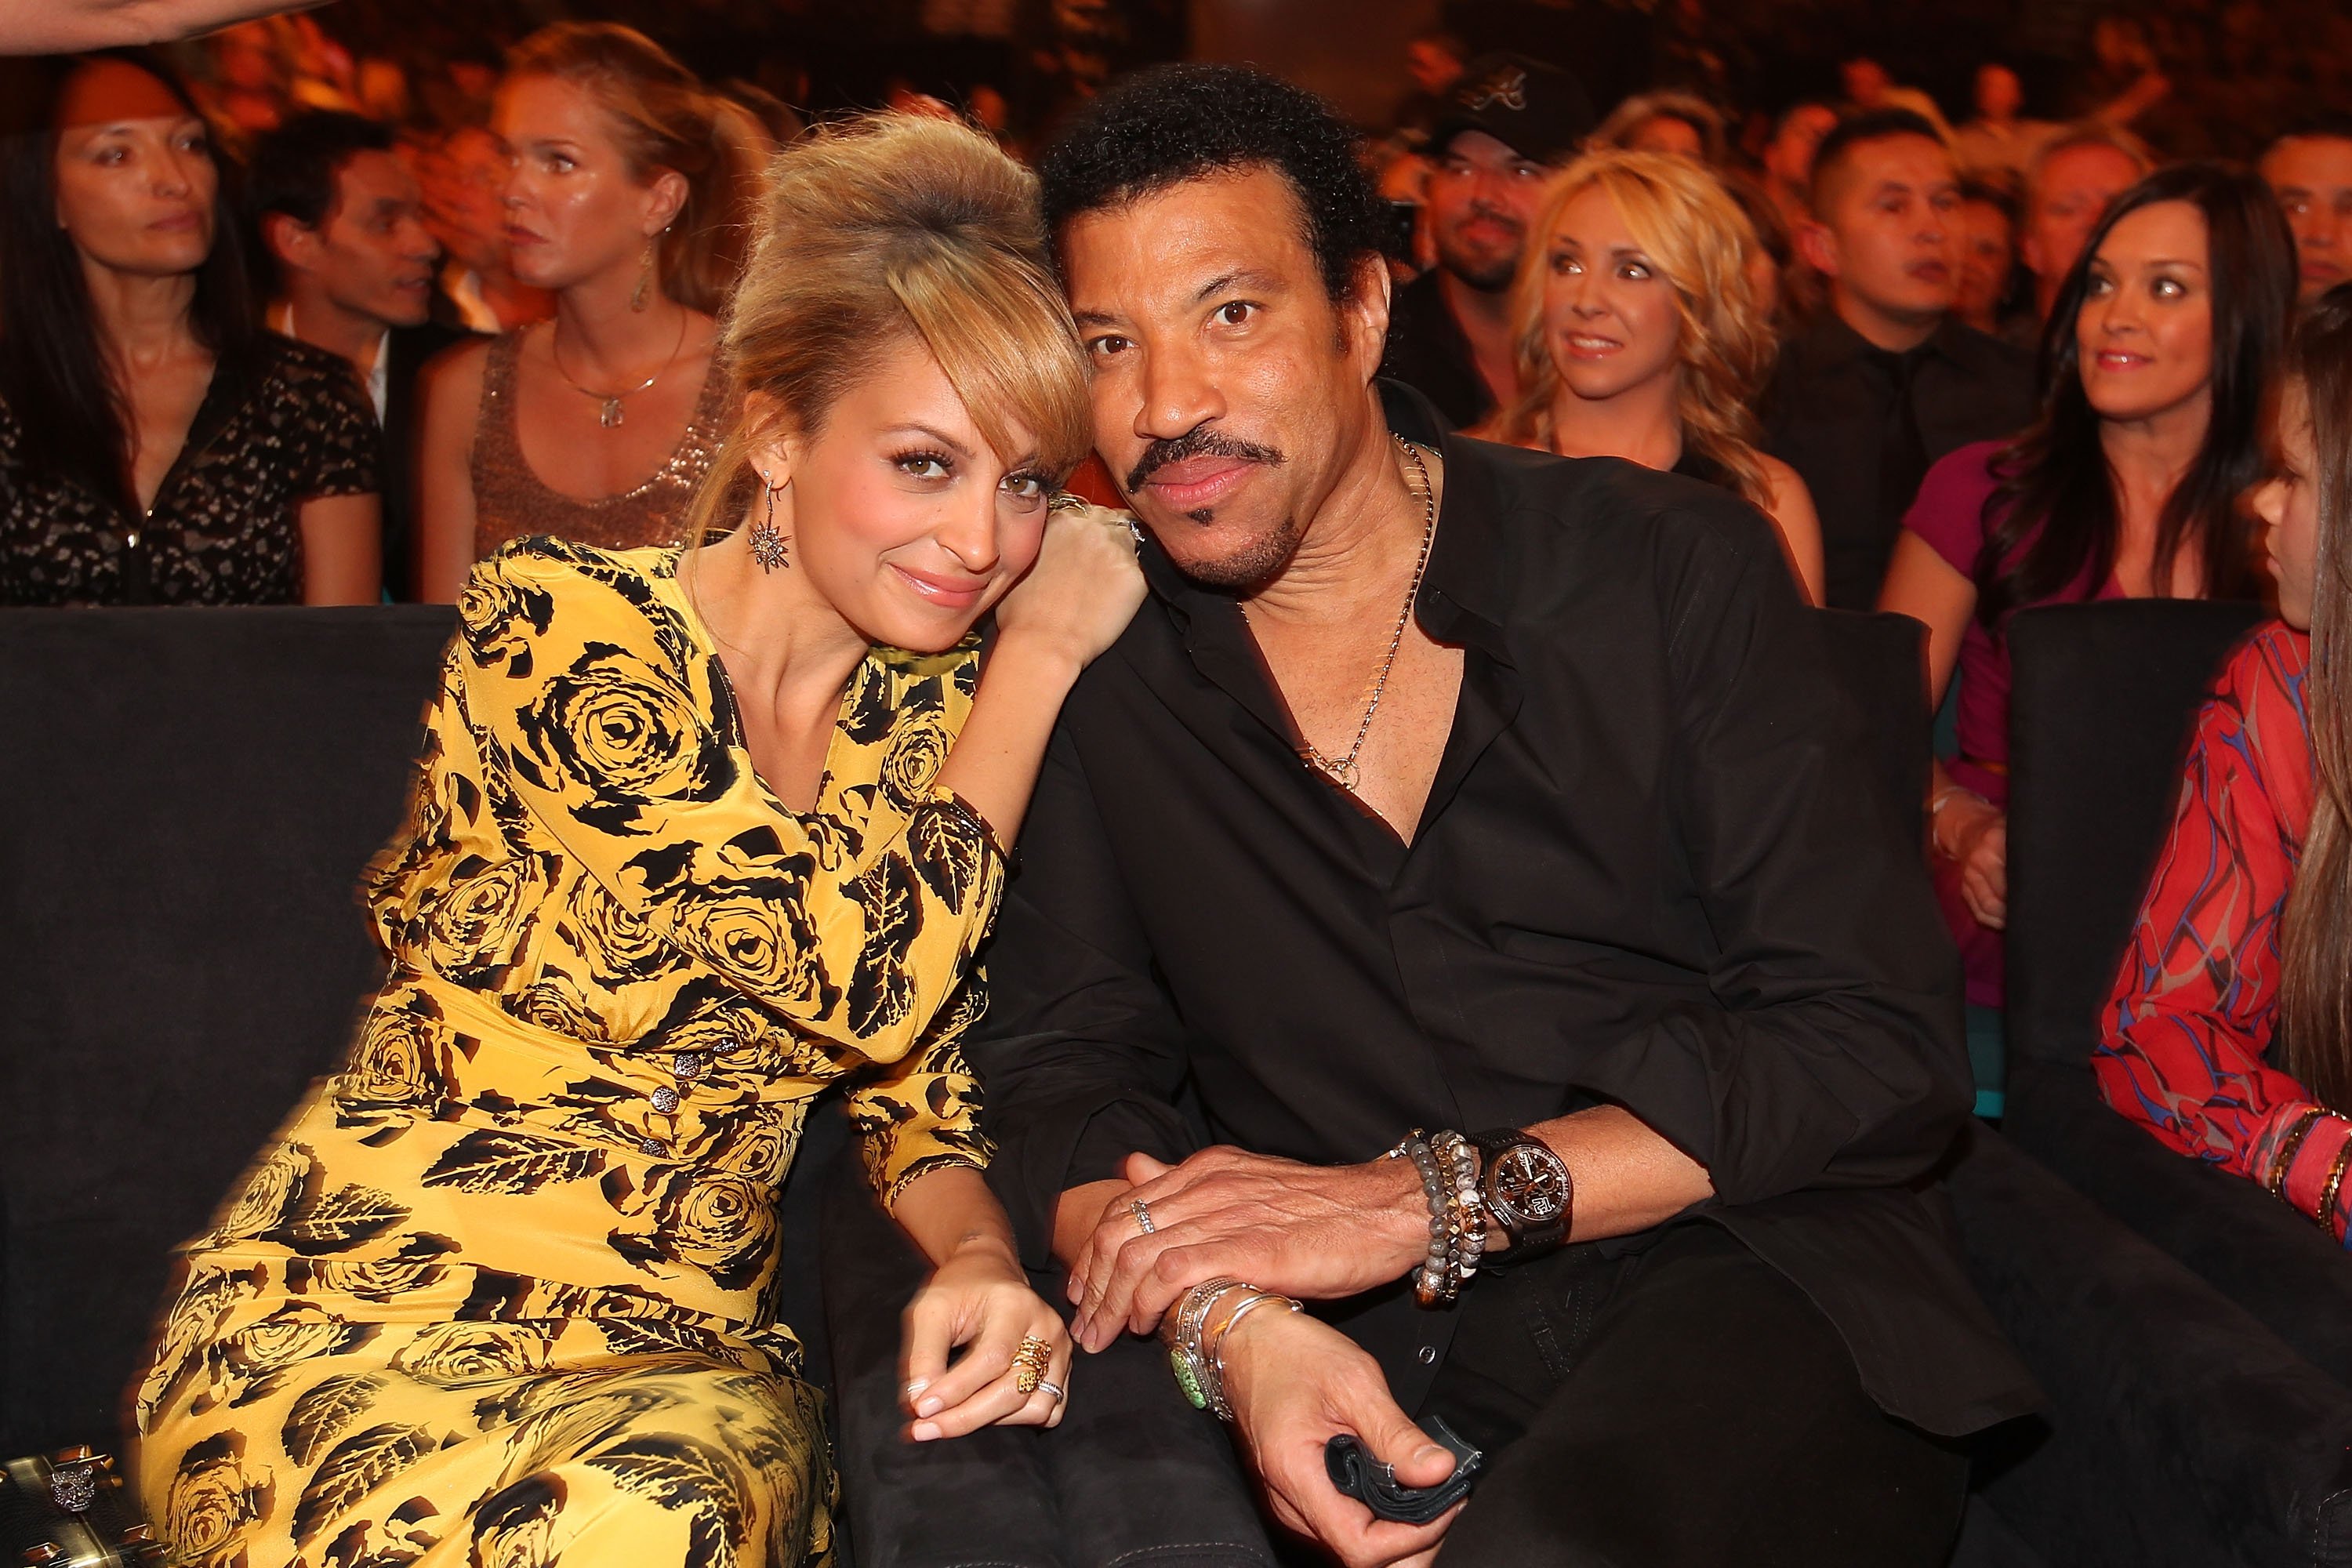 TV Personality Nicole Richie and her father Lionel Richie attend Lionel Richie and Friends in Concert at the MGM Grand Garden Arena on April 2, 2012 in Las Vegas, Nevada. / Source: Getty Images